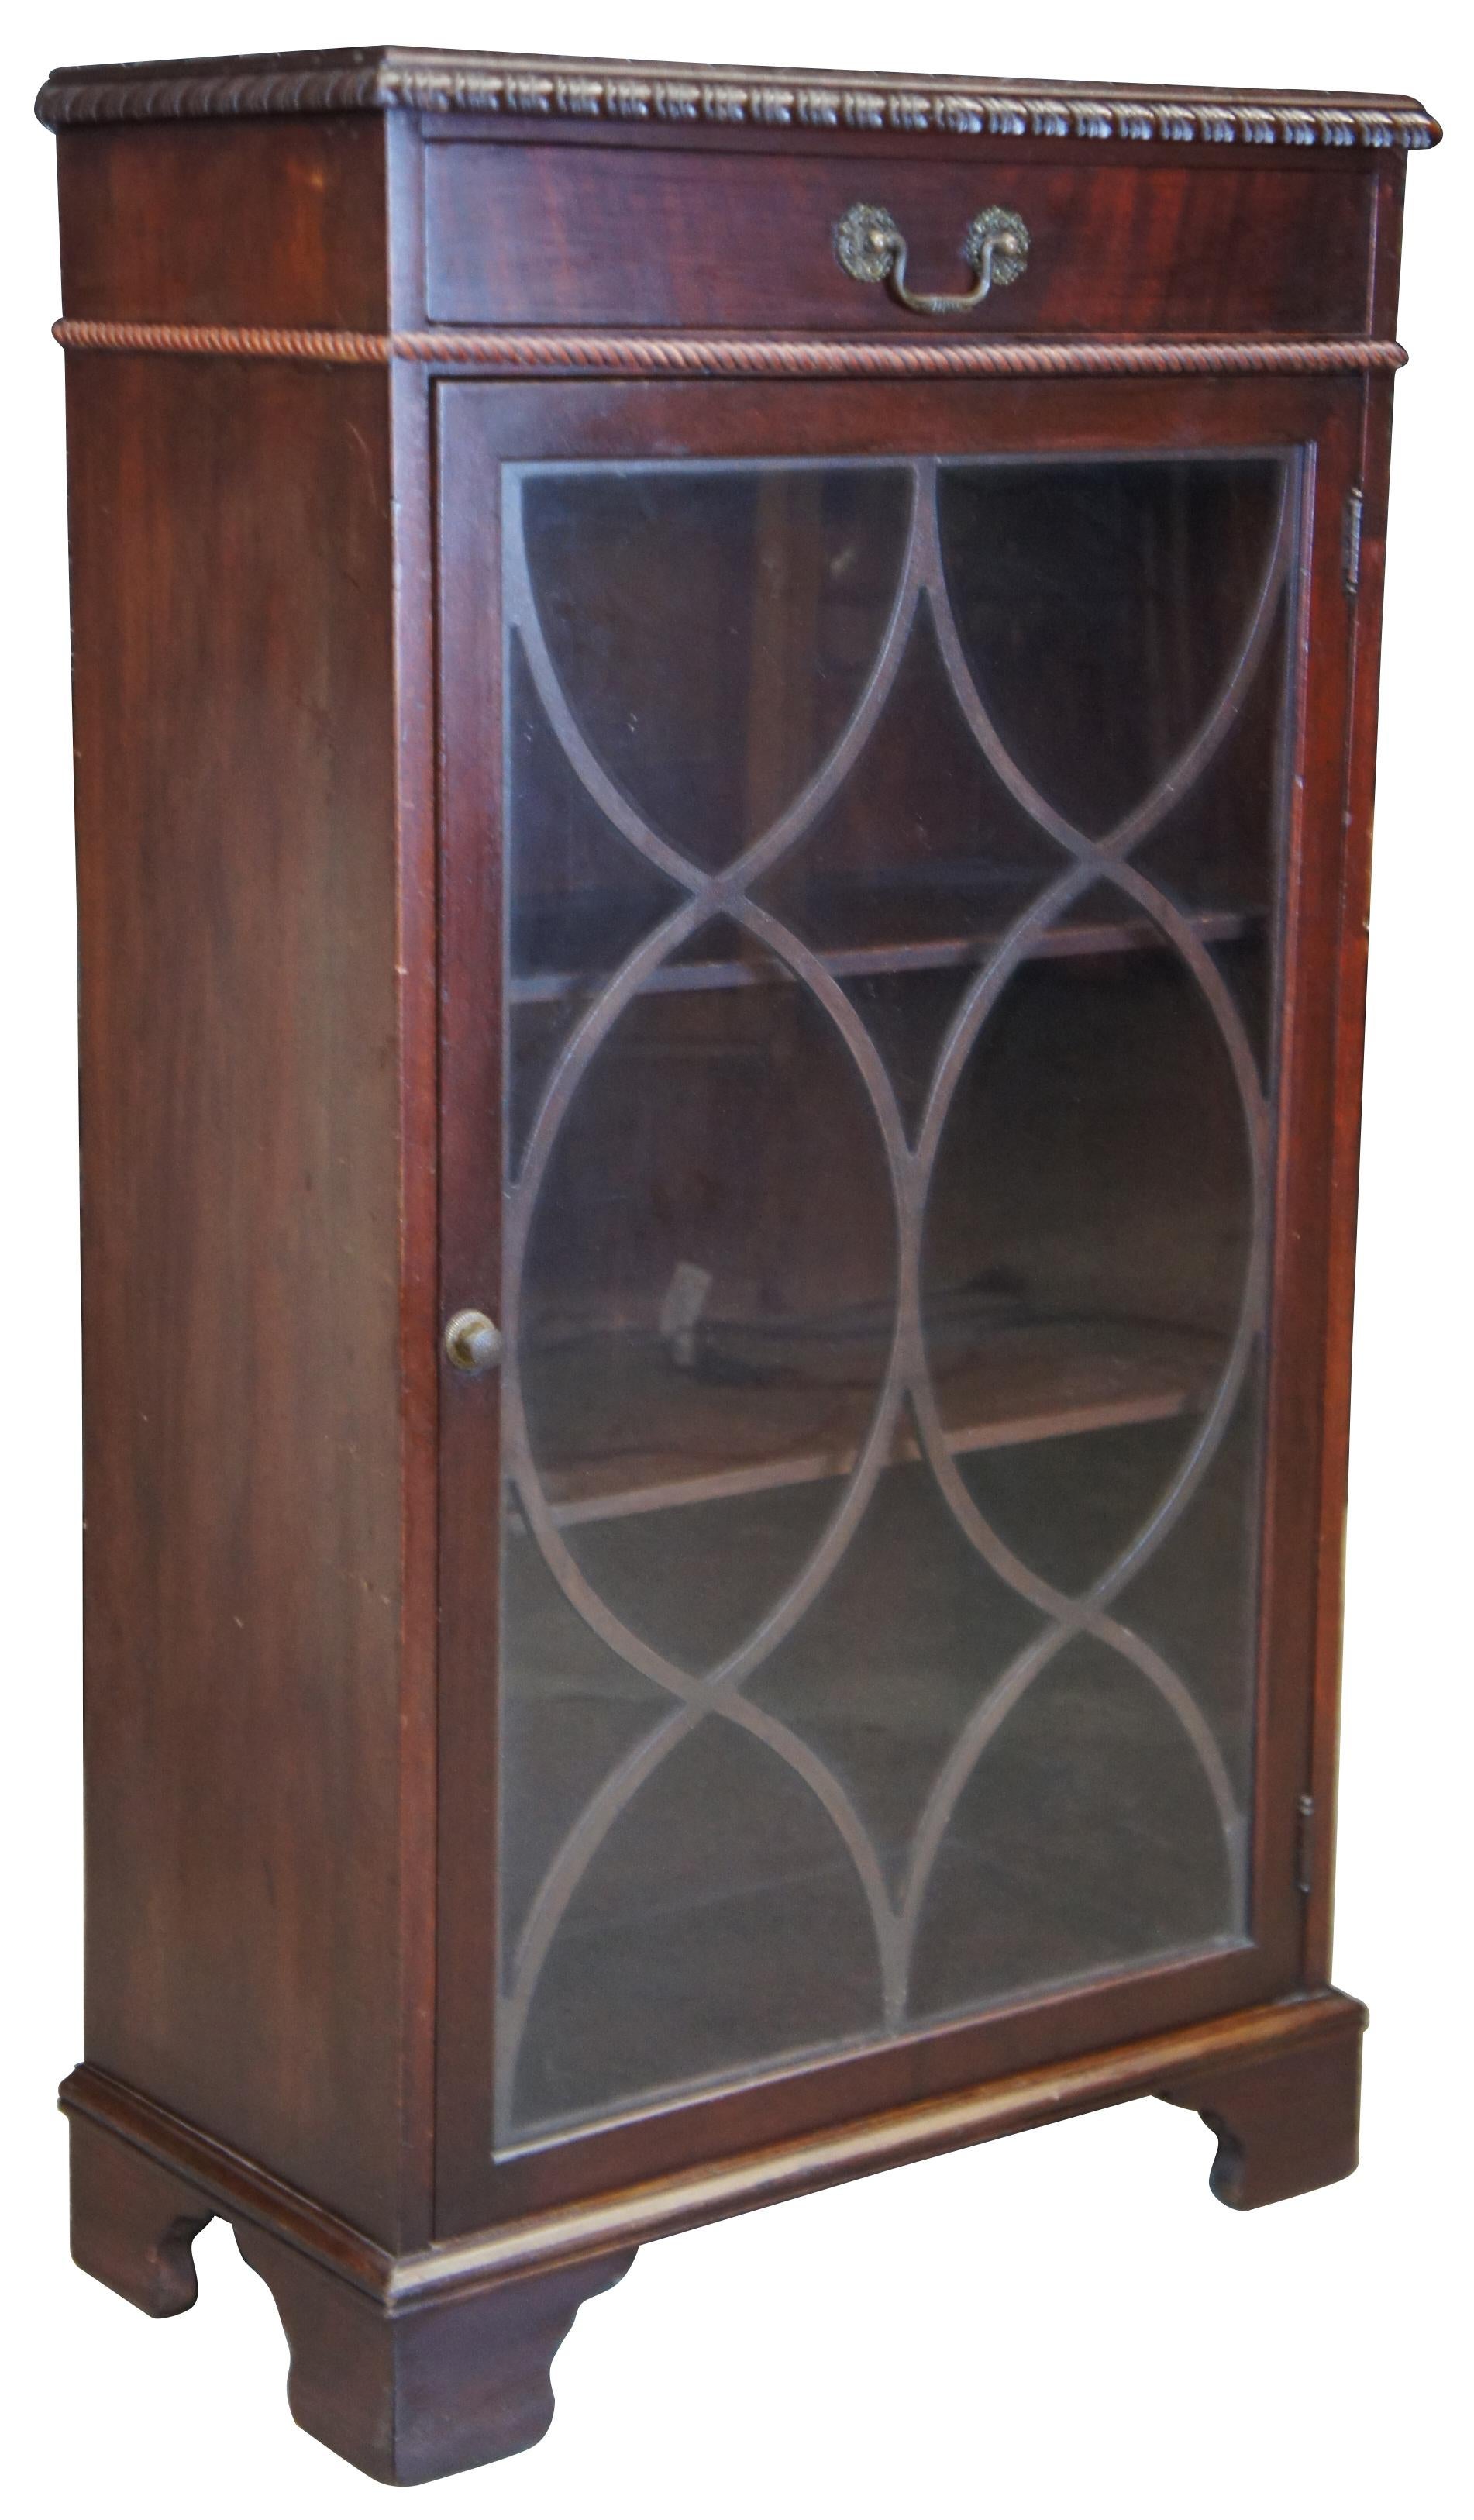 Georgian inspired cabinet by Sligh Lowry Furniture Company, circa 1950s. A diminutive cabinet made from mahogany with one drawer and lower cabinet for display. Features three fixed shelves and fretwork behind glass. Cabinet is supported by bracket